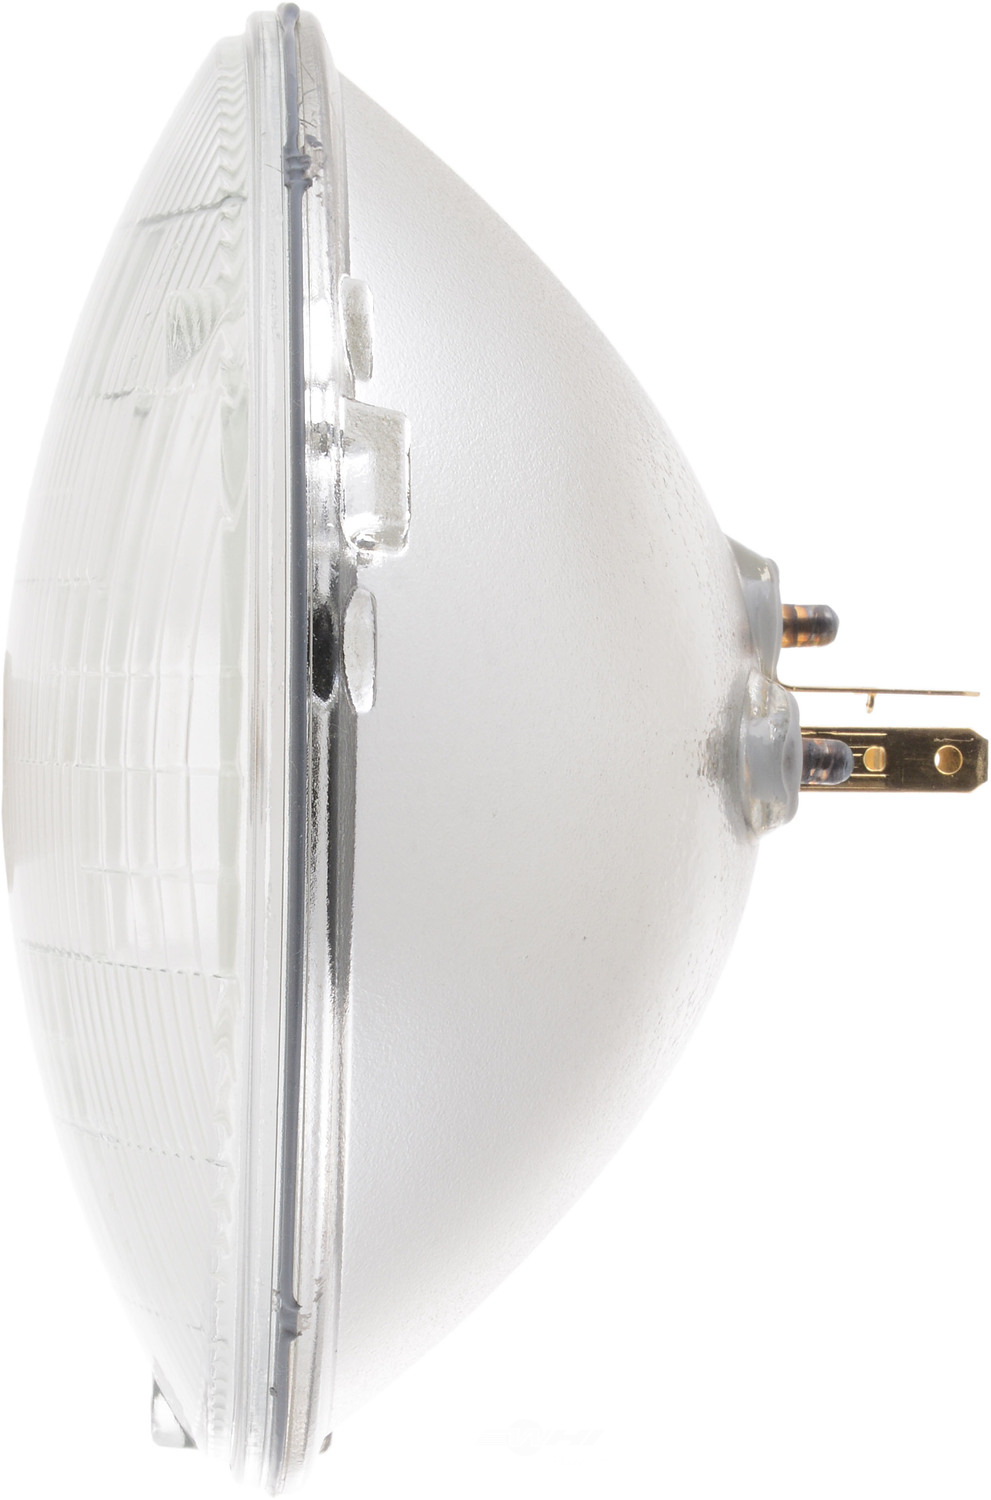 PHILIPS LIGHTING COMPANY - Standard - Single Commercial Pack (High Beam and Low Beam) - PLP H6006C1